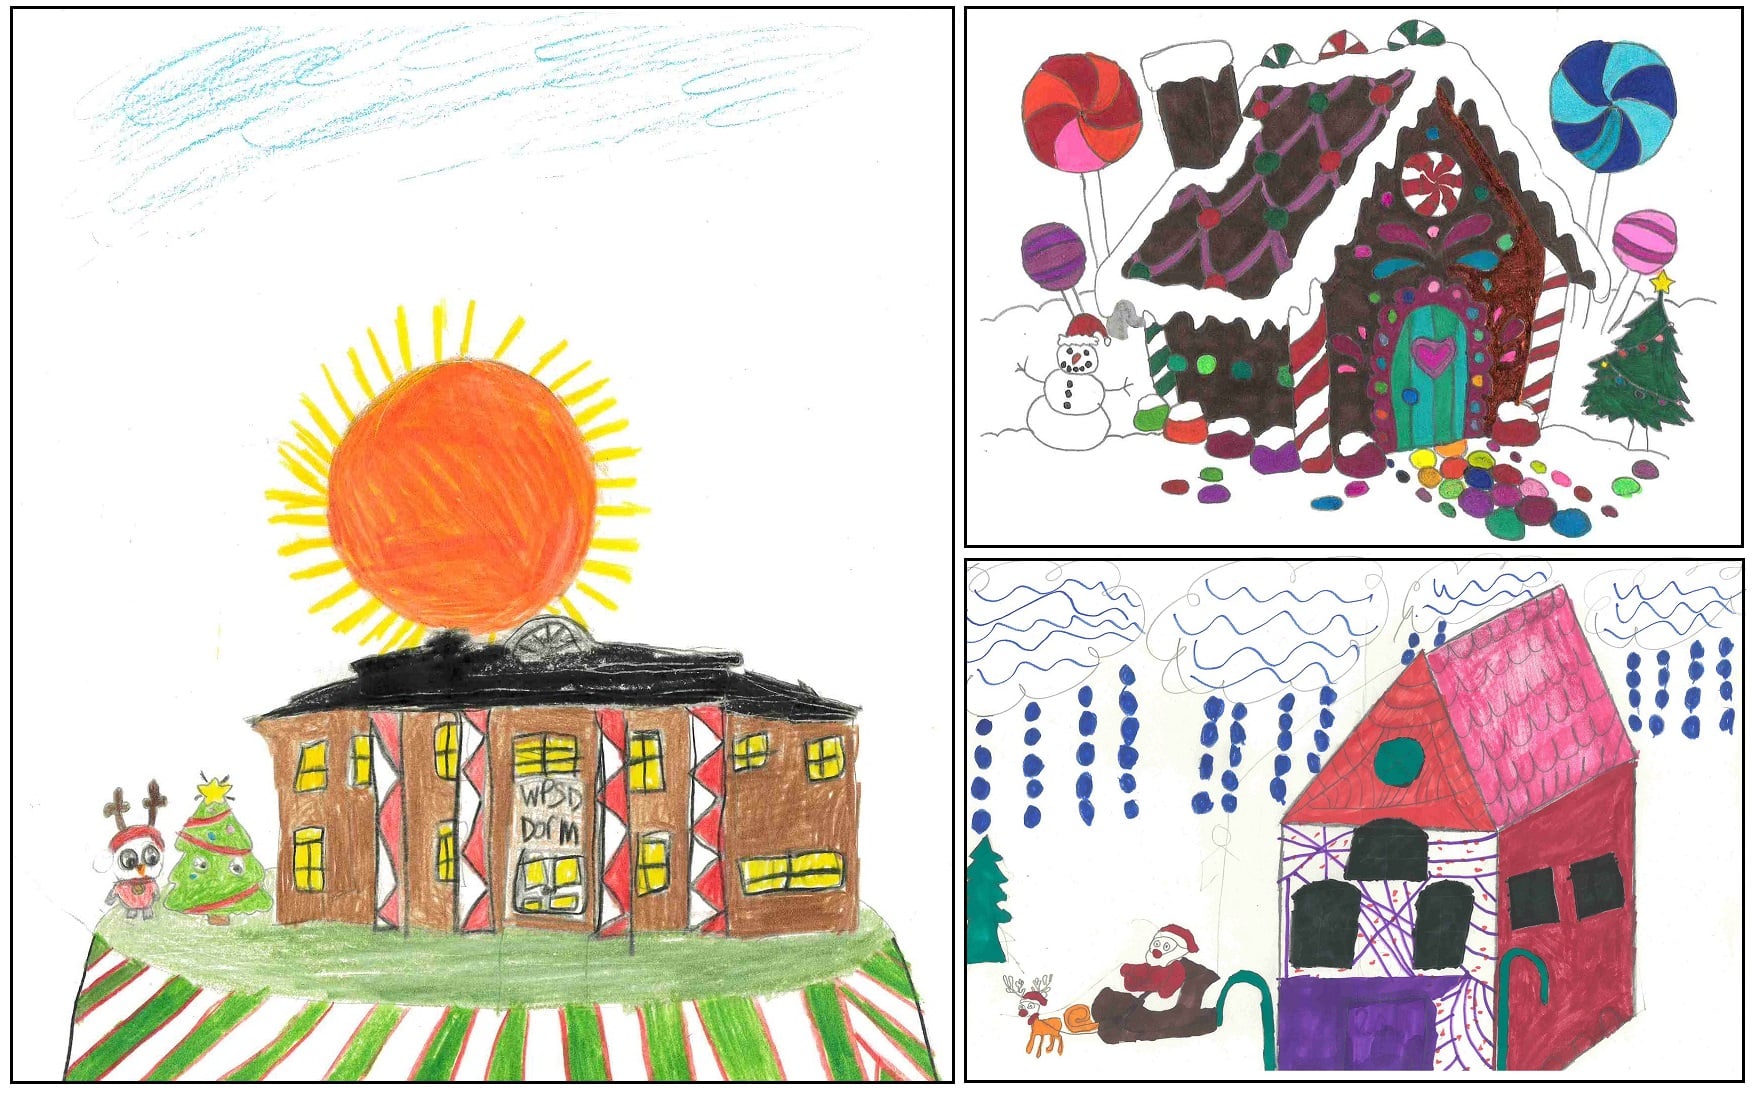 Students holiday artwork showing winter scenes, including a gingerbread house, a farm, and the exterior of the Western Pennsylvania School for the Deaf